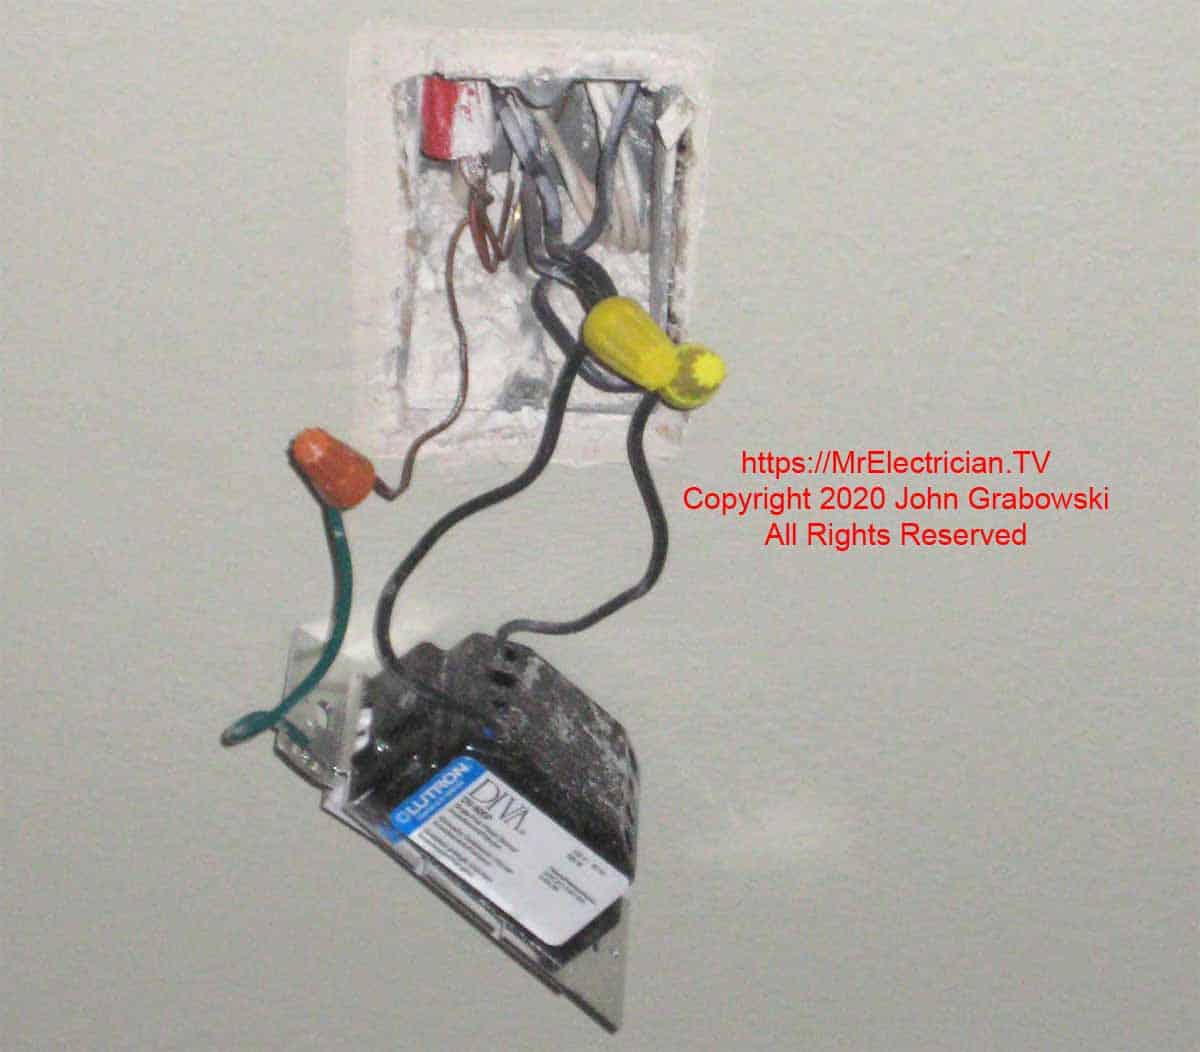 The existing dimmer switch box had the correct wiring in it to facilitate the connection to another light fixture